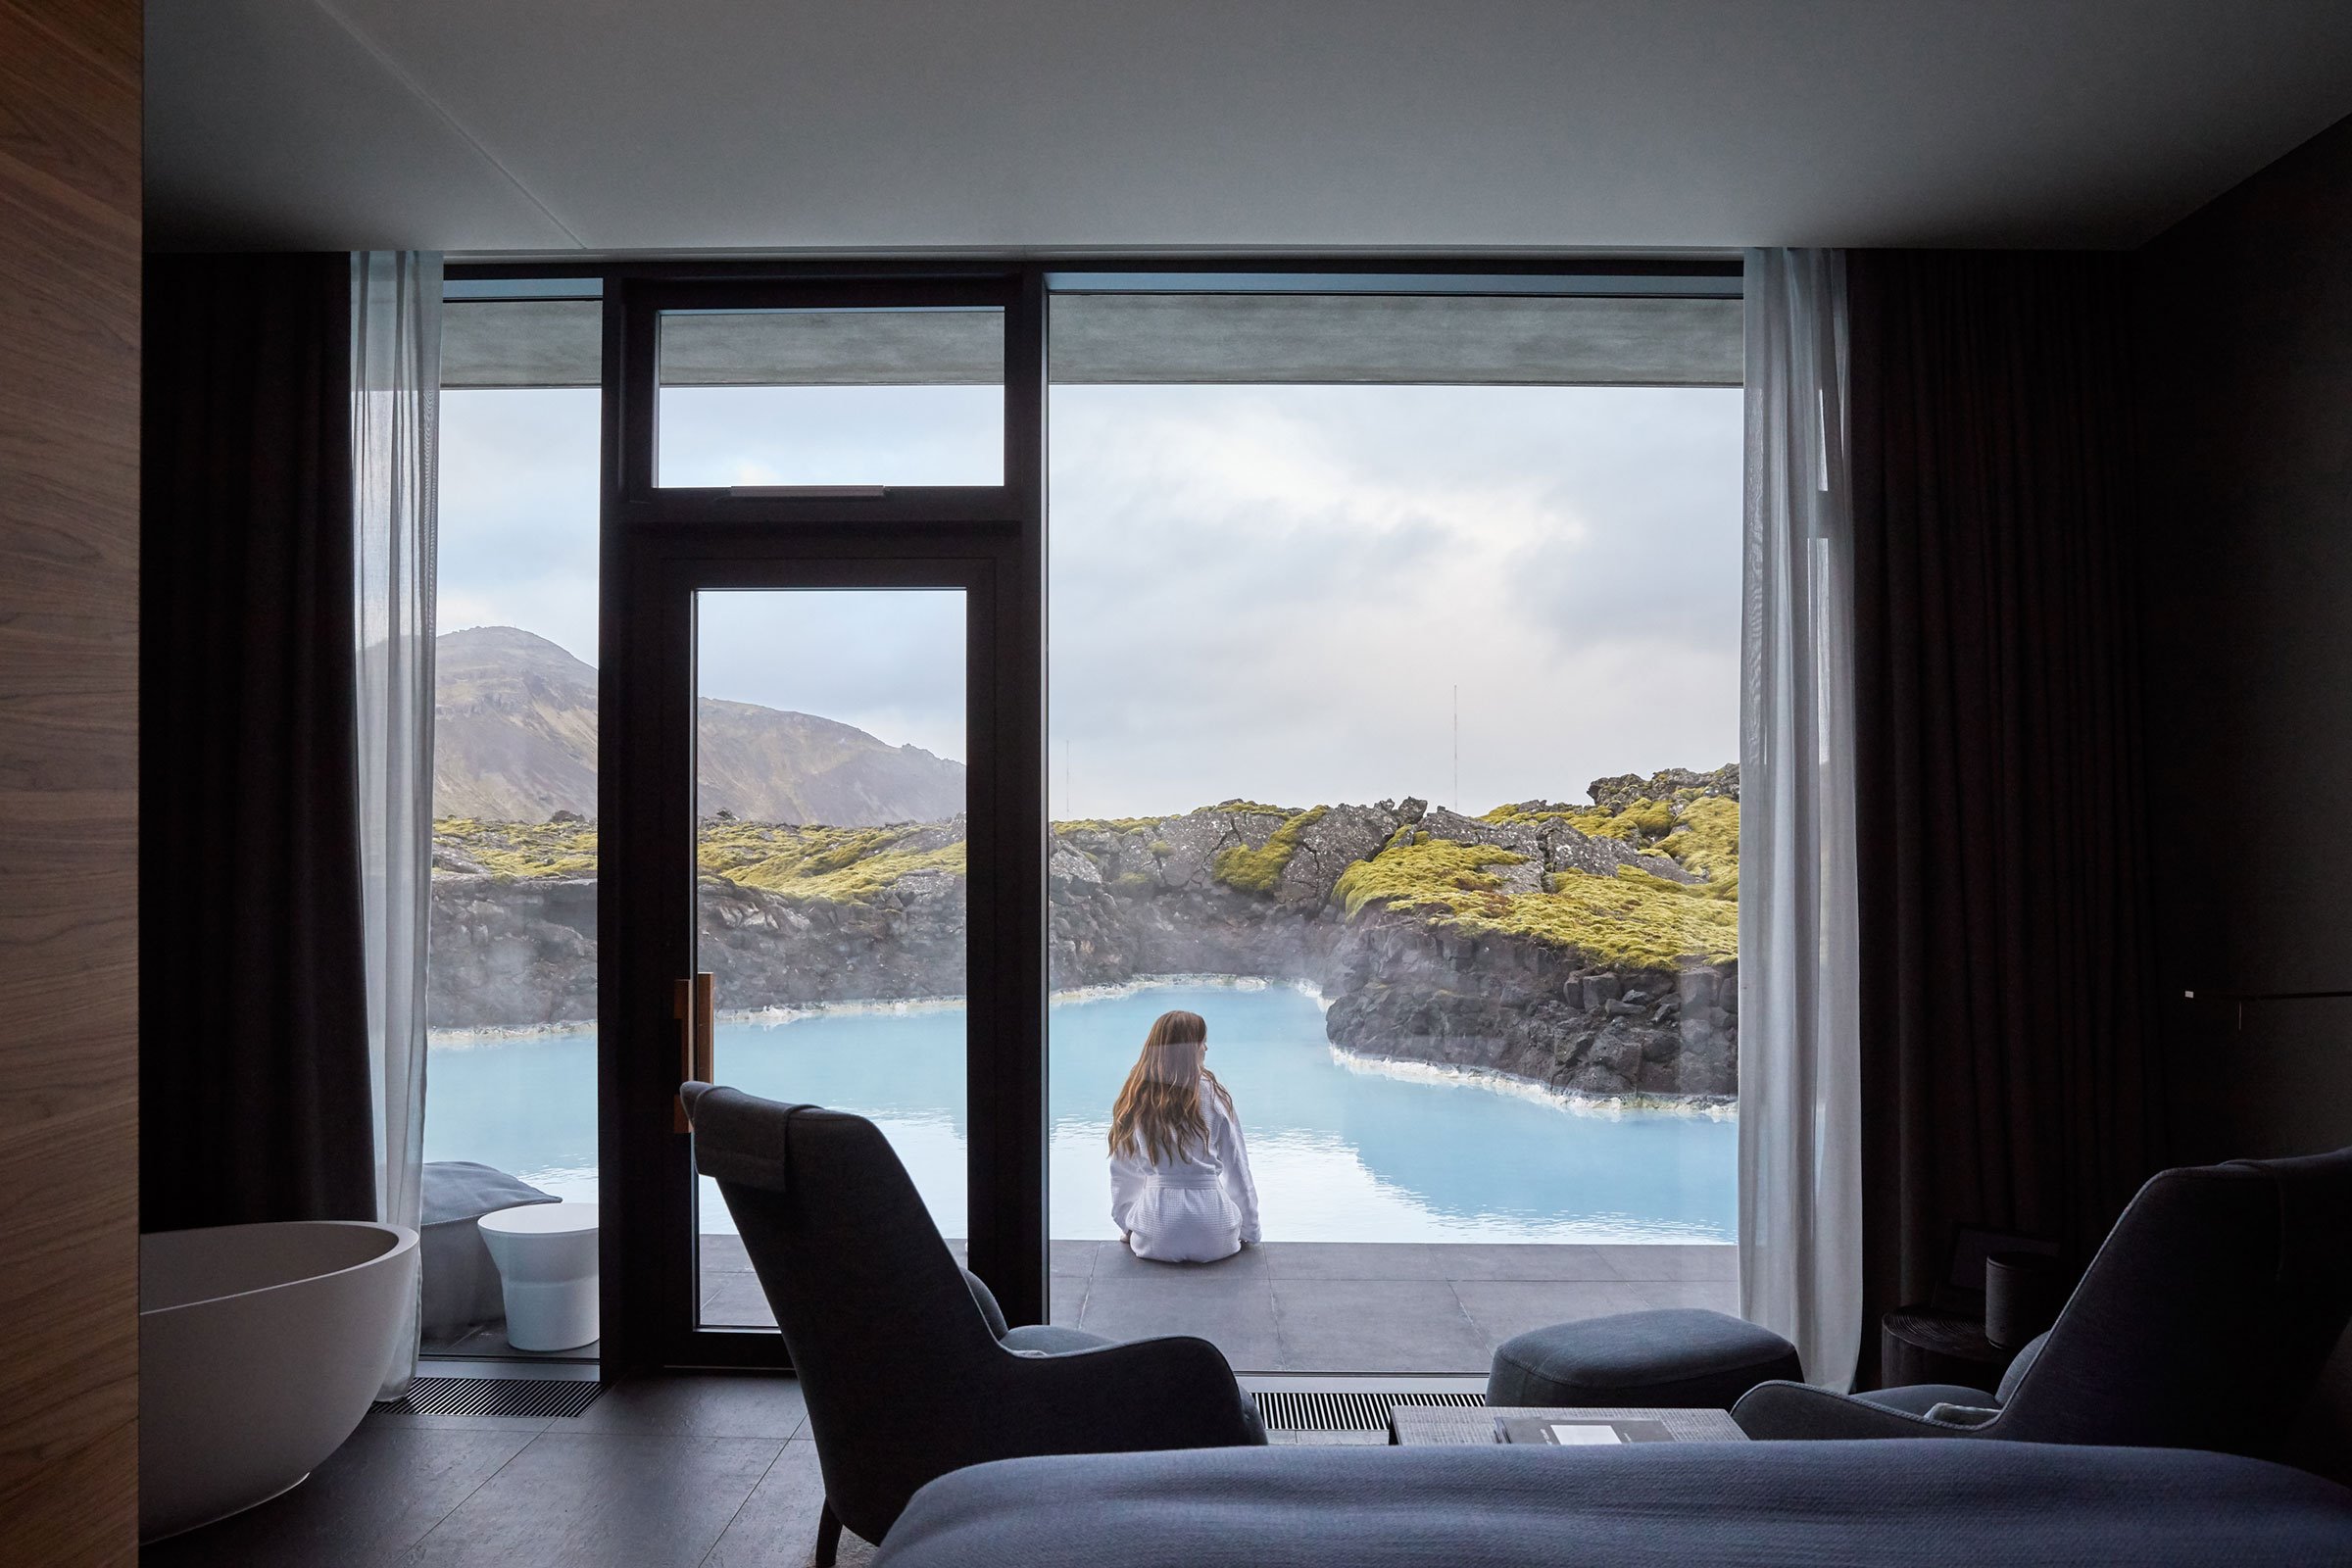 Experience true luxury by opting for the Retreat Hotel at the Blue Lagoon.